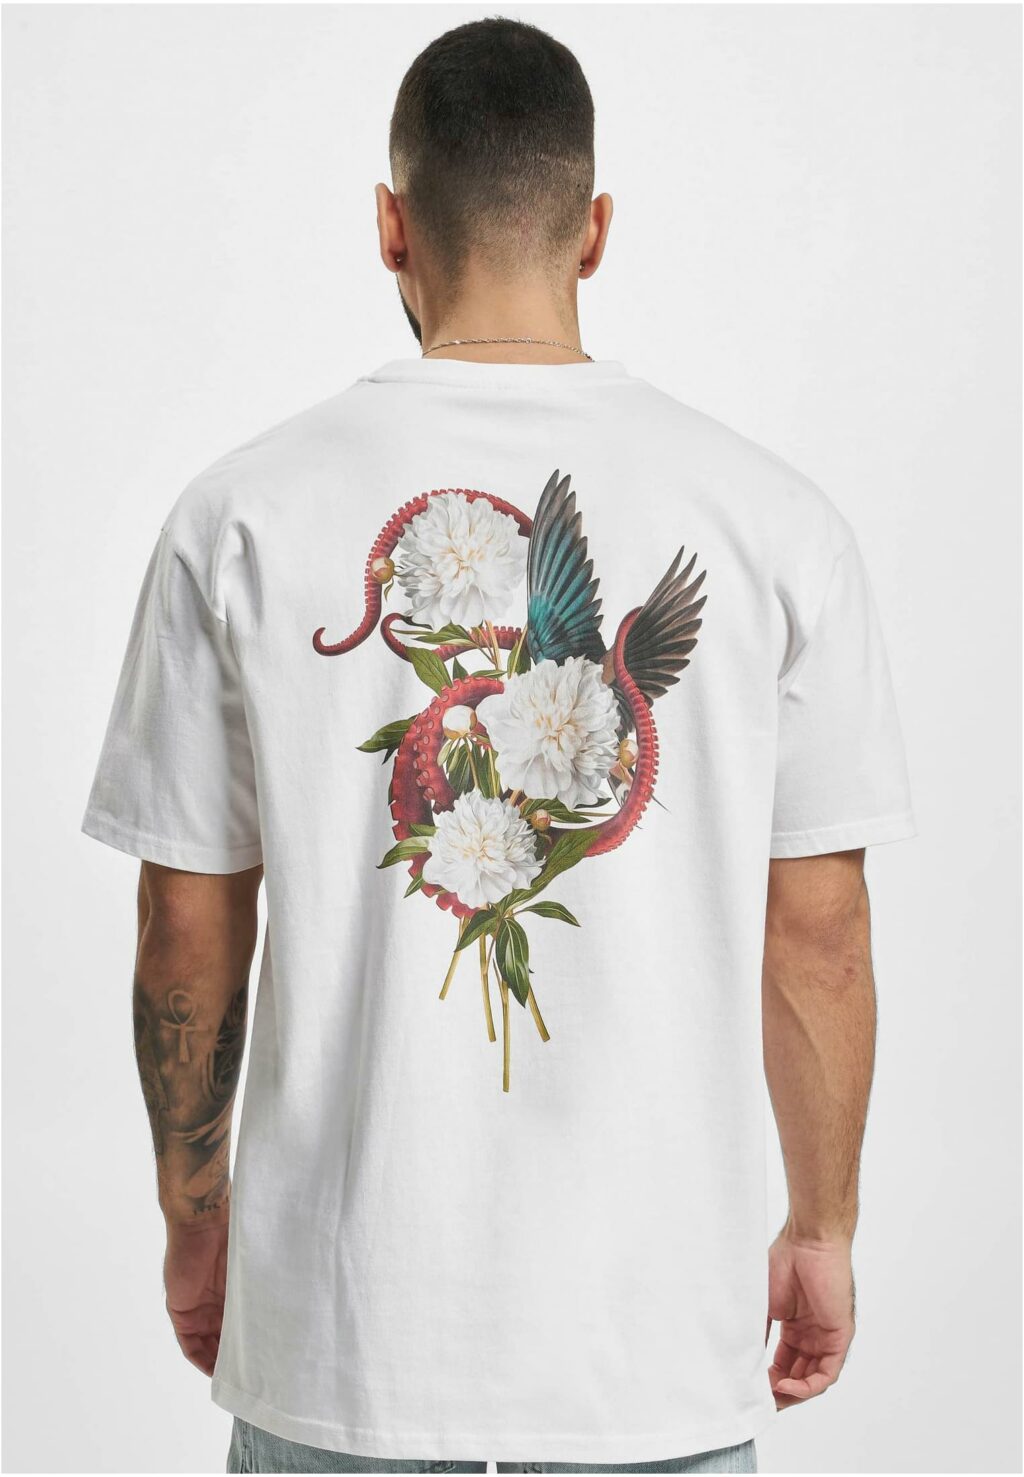 We Dream in Colors Oversize Tee white MT2417